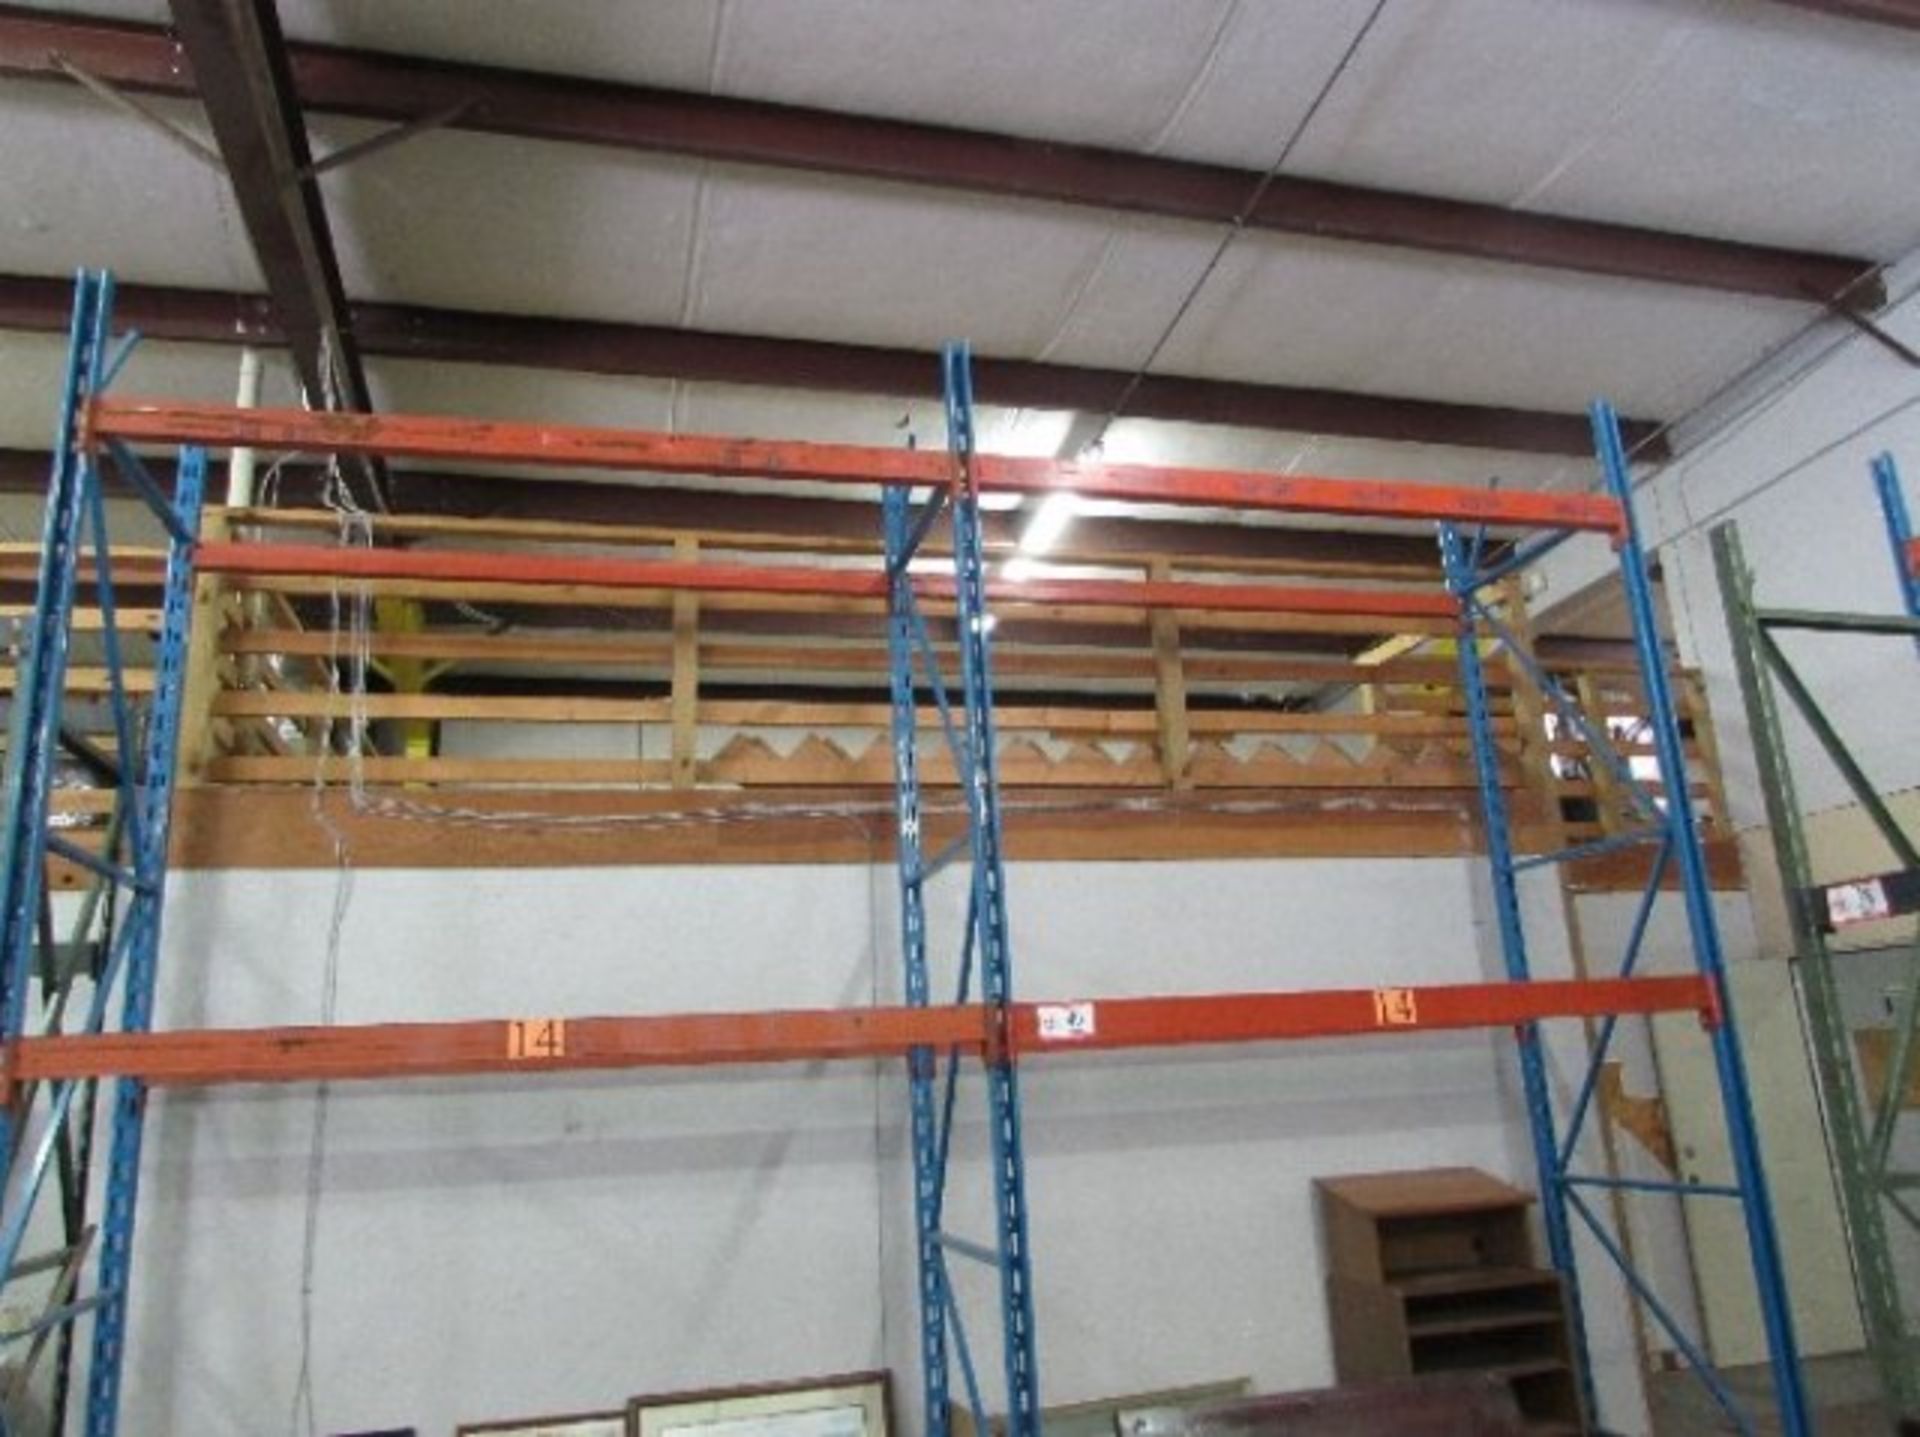 (2) Sections of Pallet Racking 42" x 96" x 168"